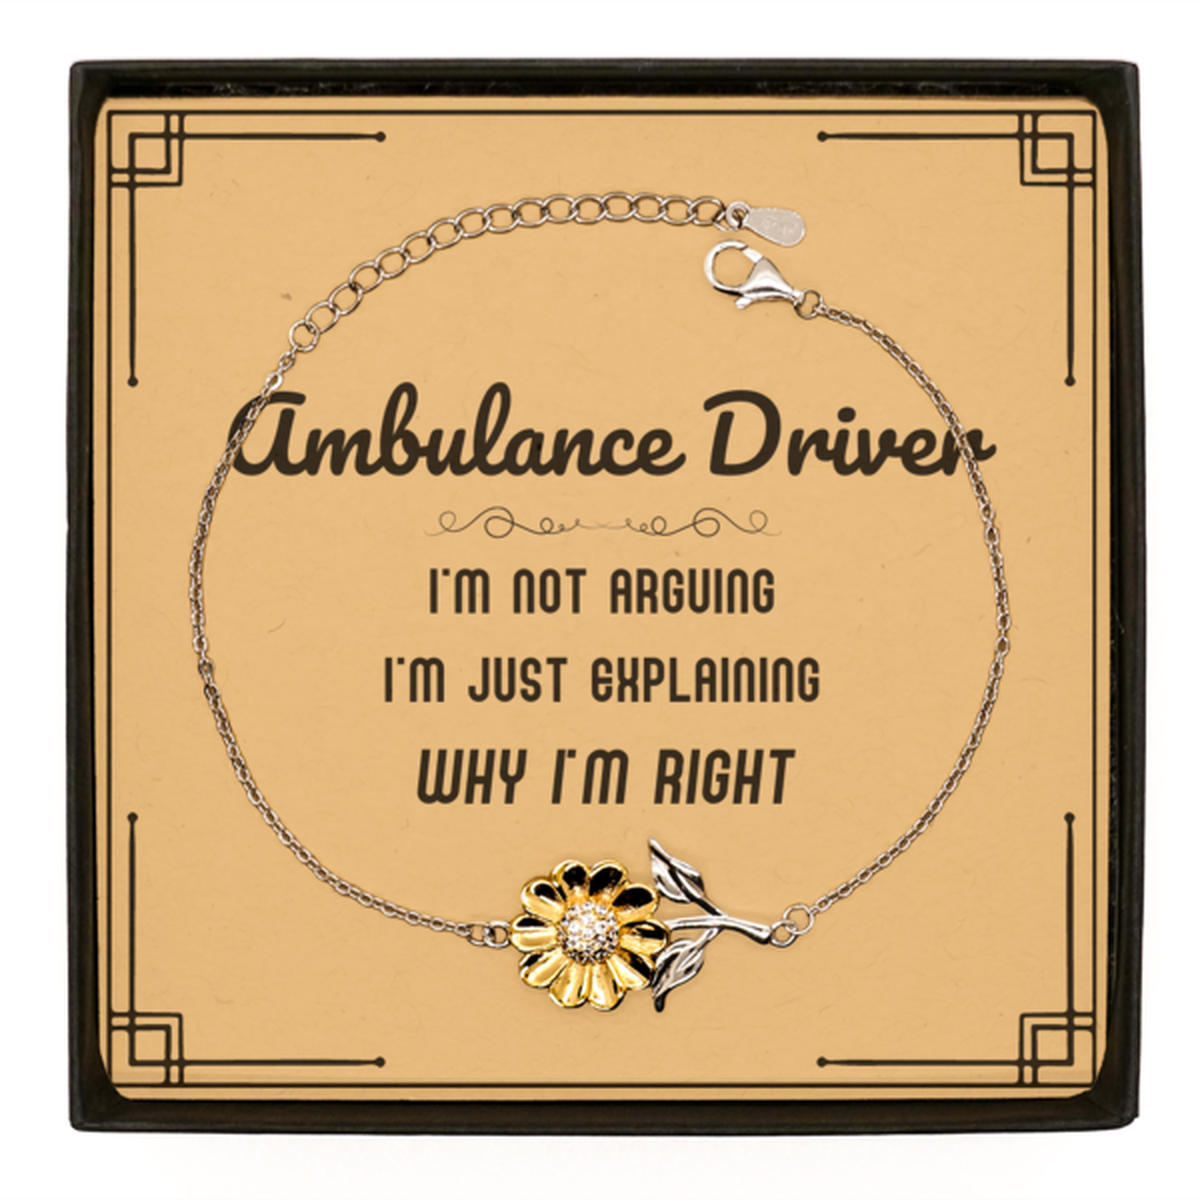 Ambulance Driver I'm not Arguing. I'm Just Explaining Why I'm RIGHT Sunflower Bracelet, Funny Saying Quote Ambulance Driver Gifts For Ambulance Driver Message Card Graduation Birthday Christmas Gifts for Men Women Coworker